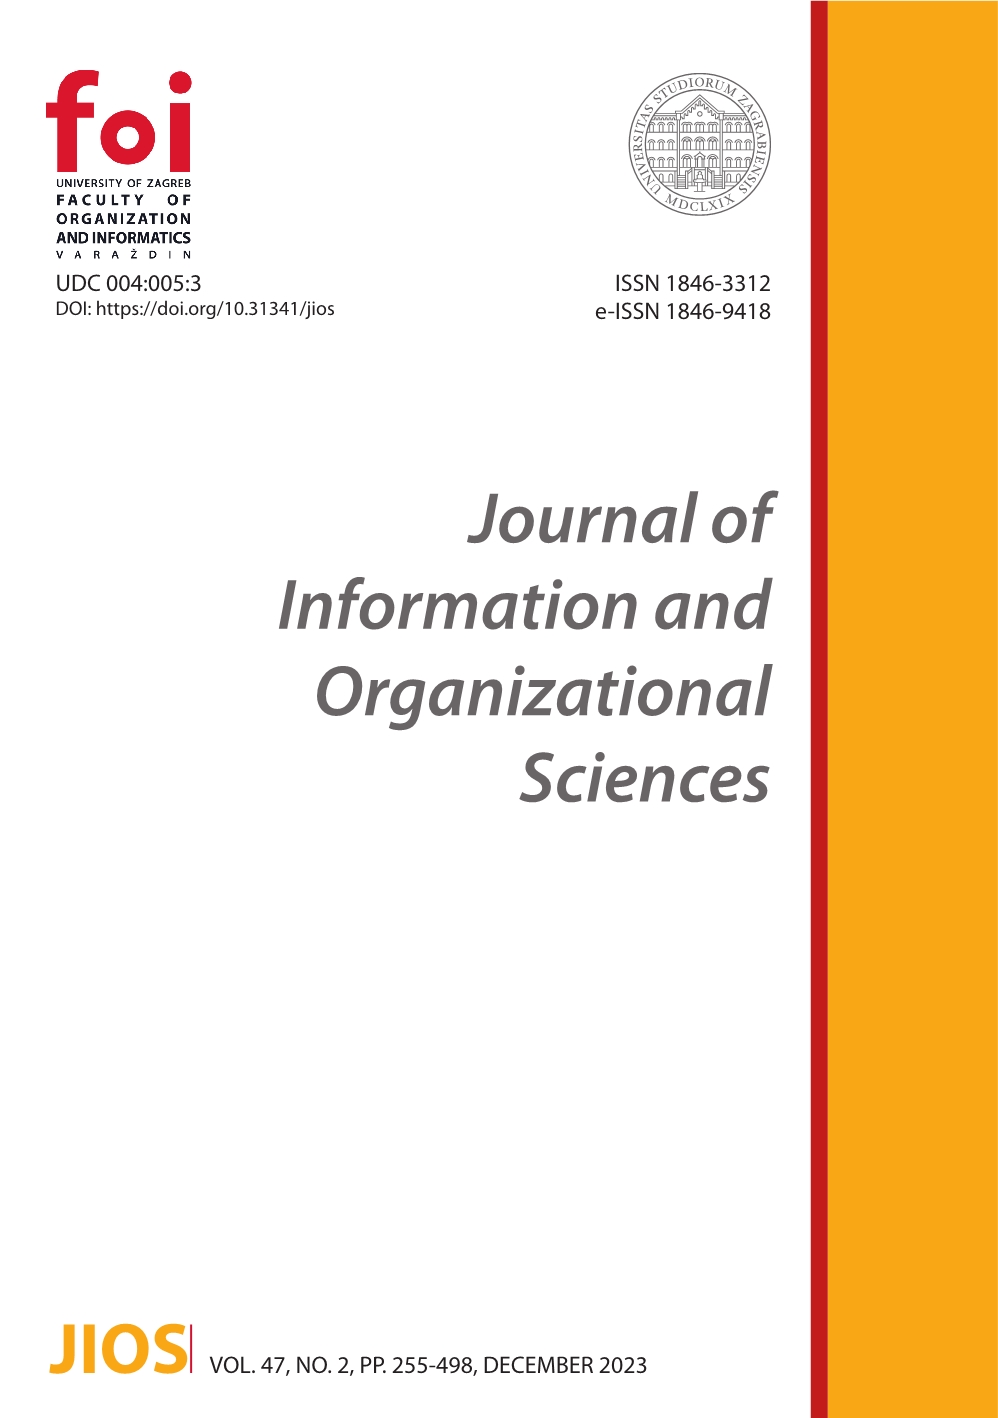 The Impact of Organizational Support and Employee Attitude to Innovative Work Behavior Mediating Role of Psychologic Empowerment